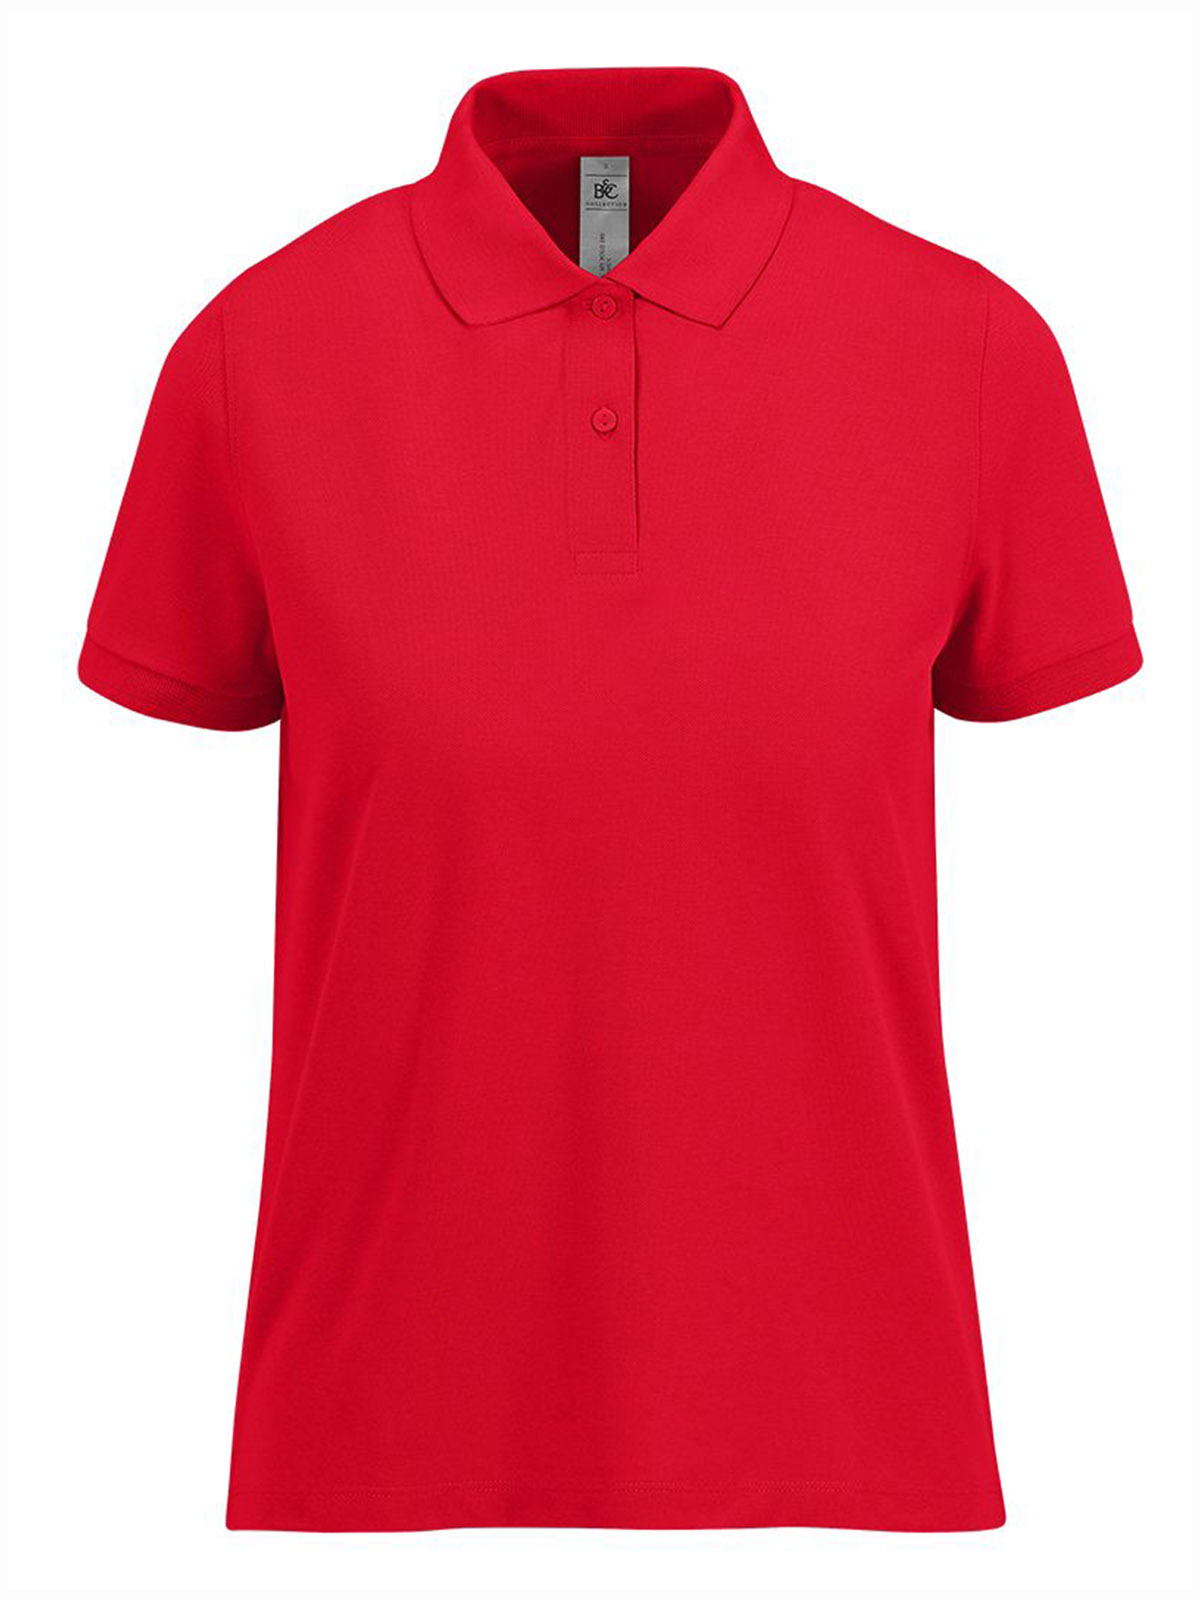 bc-my-polo-180-women-red.webp